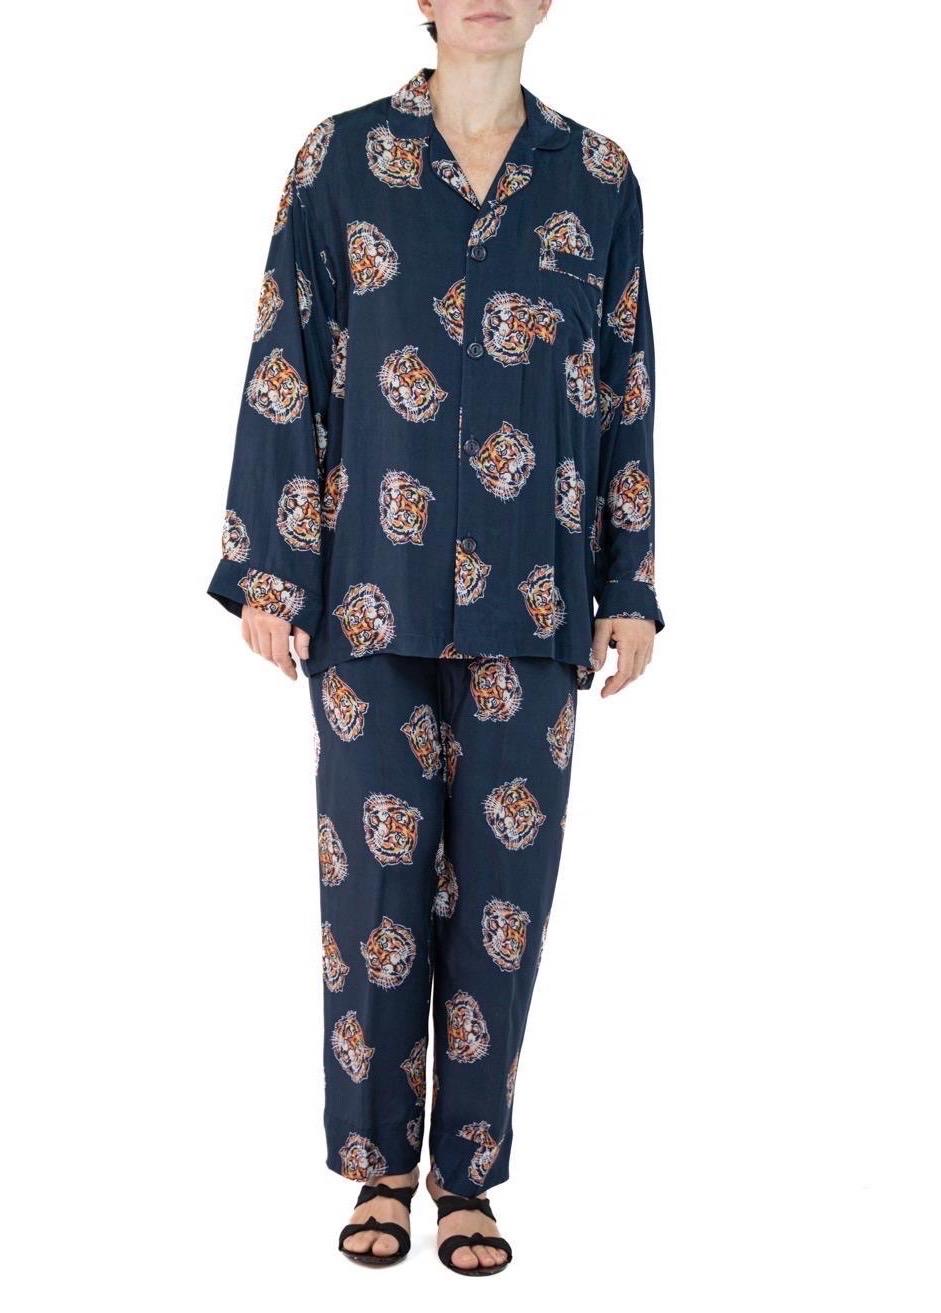 Morphew Collection Indigo Blue Tiger Head Print Cold Rayon Bias Pajamas
MORPHEW COLLECTION is made entirely by hand in our NYC Ateliér of rare antique materials sourced from around the globe. Our sustainable vintage materials represent over a